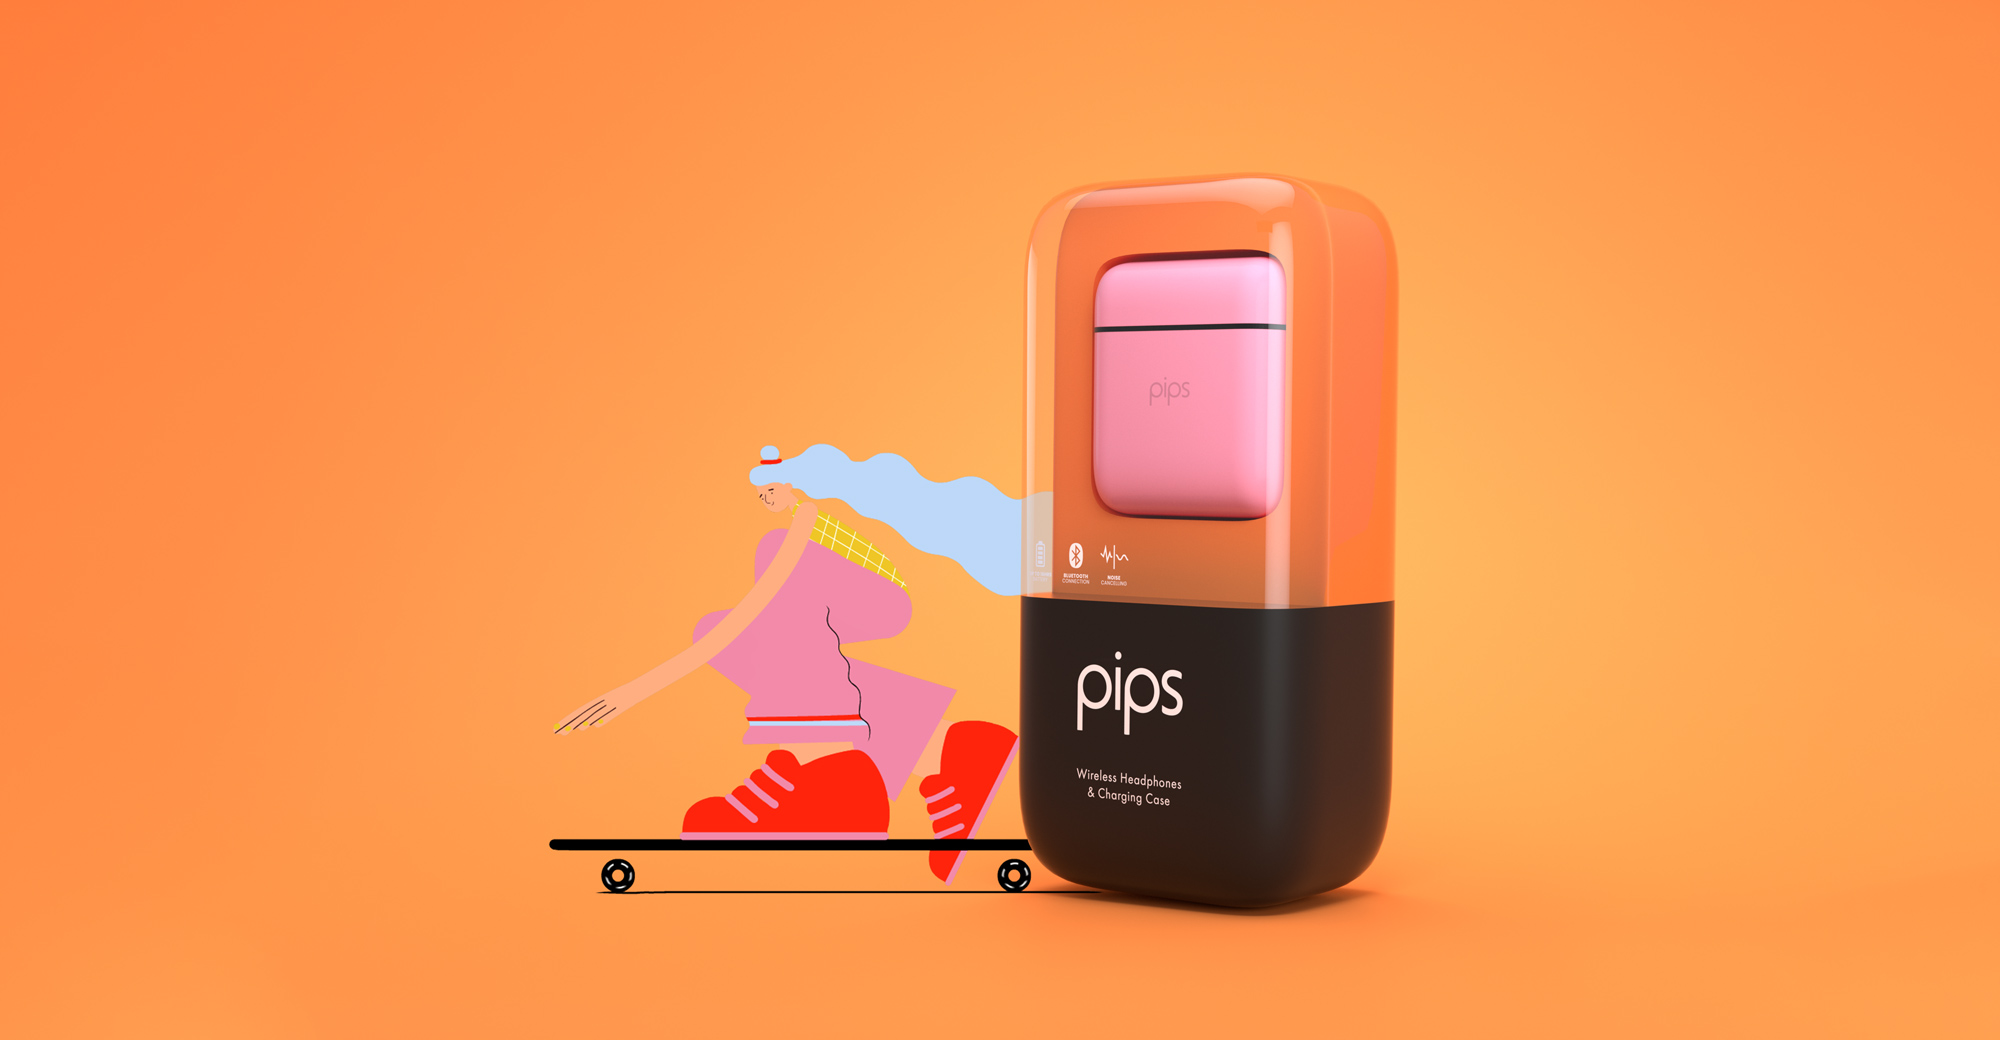 Product photo and skateboard illustration from the PIP's animation